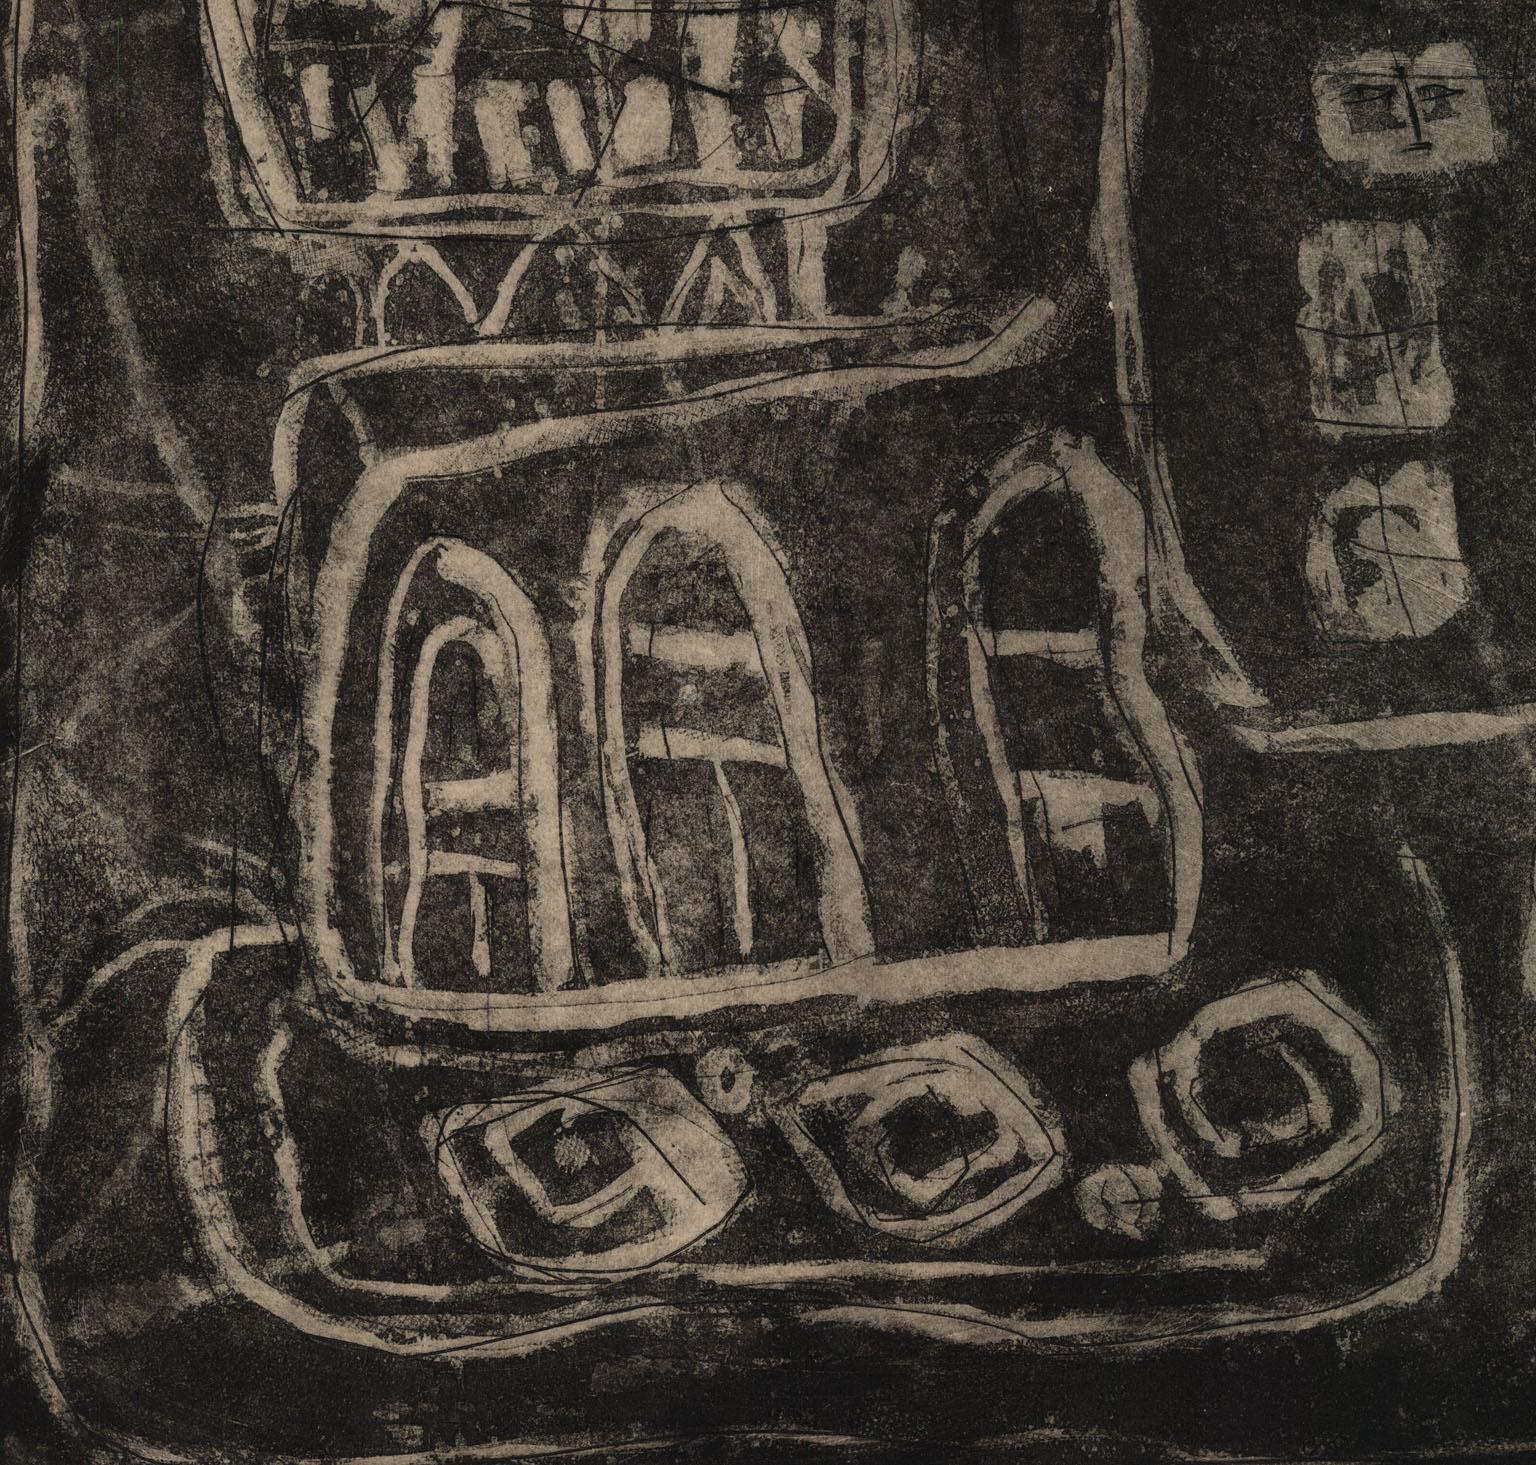 Louise Nevelson created the etching and aquatint entitled “CIRCUS WAGON” in 1953. This scarce EARLY impression was printed in an edition of 20.   The image size is 15 x 17 5/8 inches (38 x 44.7 cm).  The paper size is 18 ½ x 20 15/16 inches (47.2 x